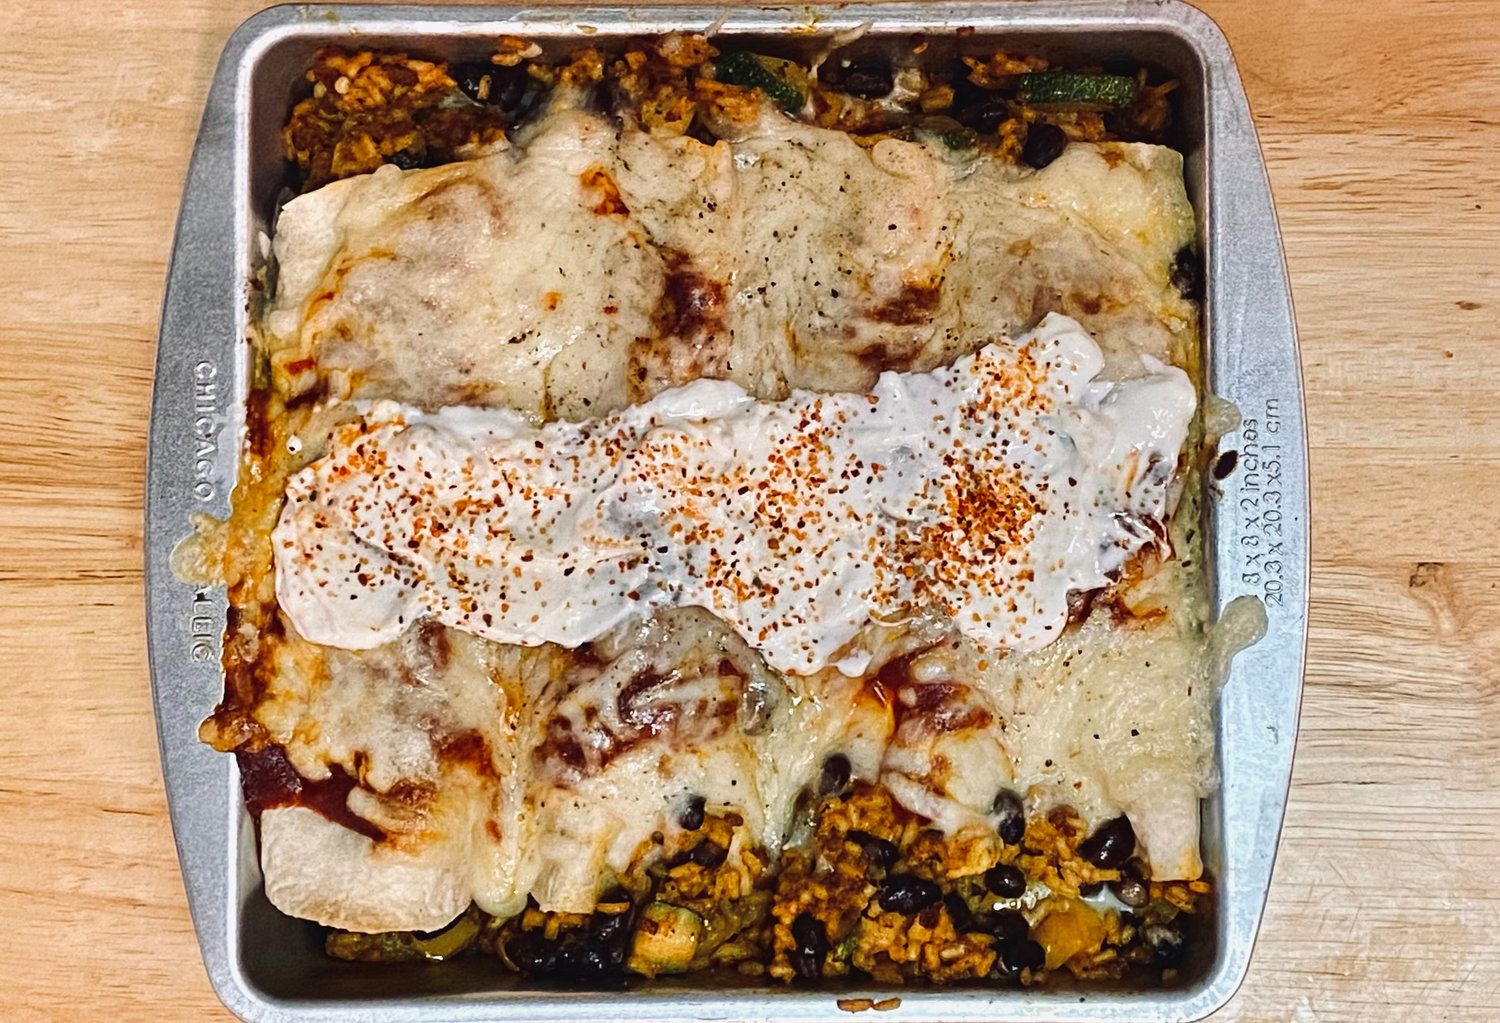 The spice and smoky flavors always make me crave it, and smoky veggie enchiladas are extremely versatile and simple.